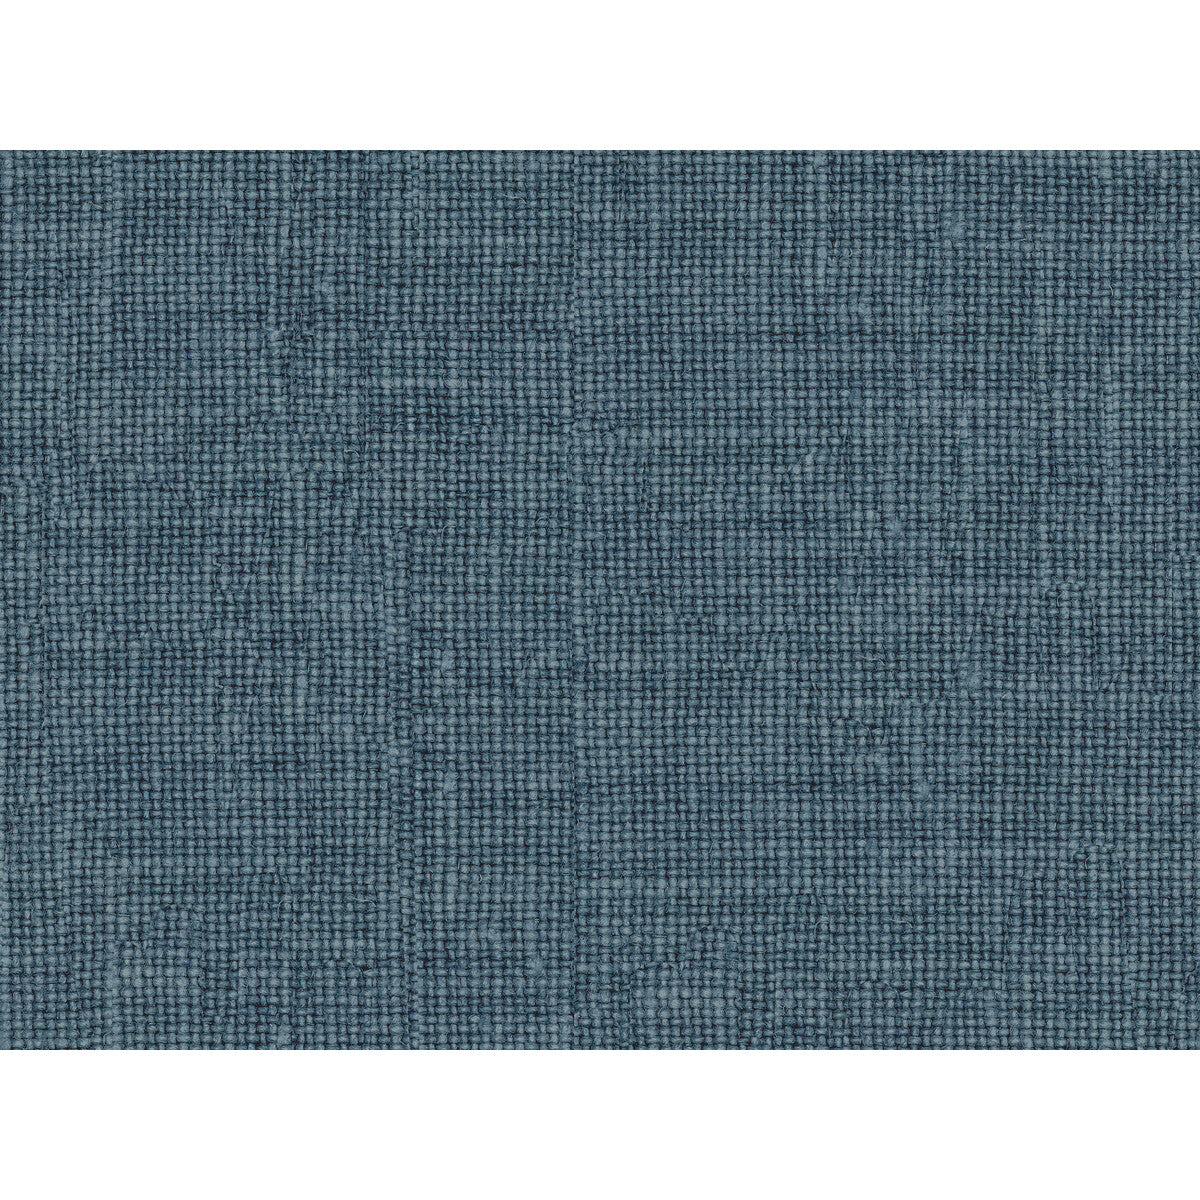 Weathered Linen fabric in teal color - pattern BF10962.615.0 - by G P &amp; J Baker in the Baker House Linens collection